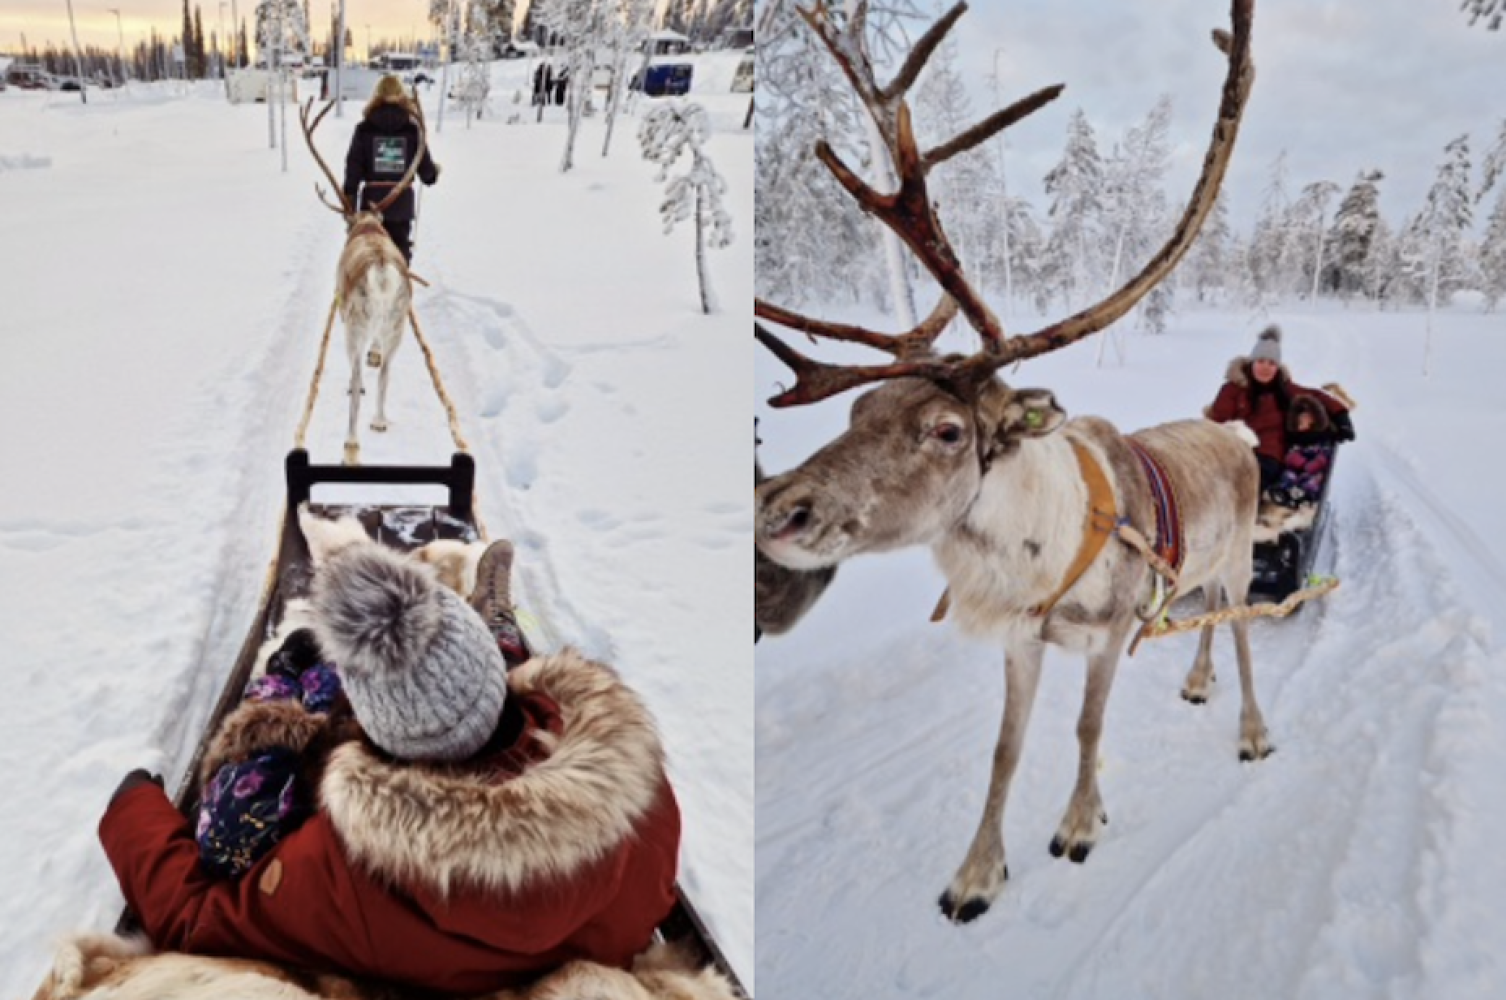 Get to know our local livelyhood and enjoy a reindeer sleigh ride